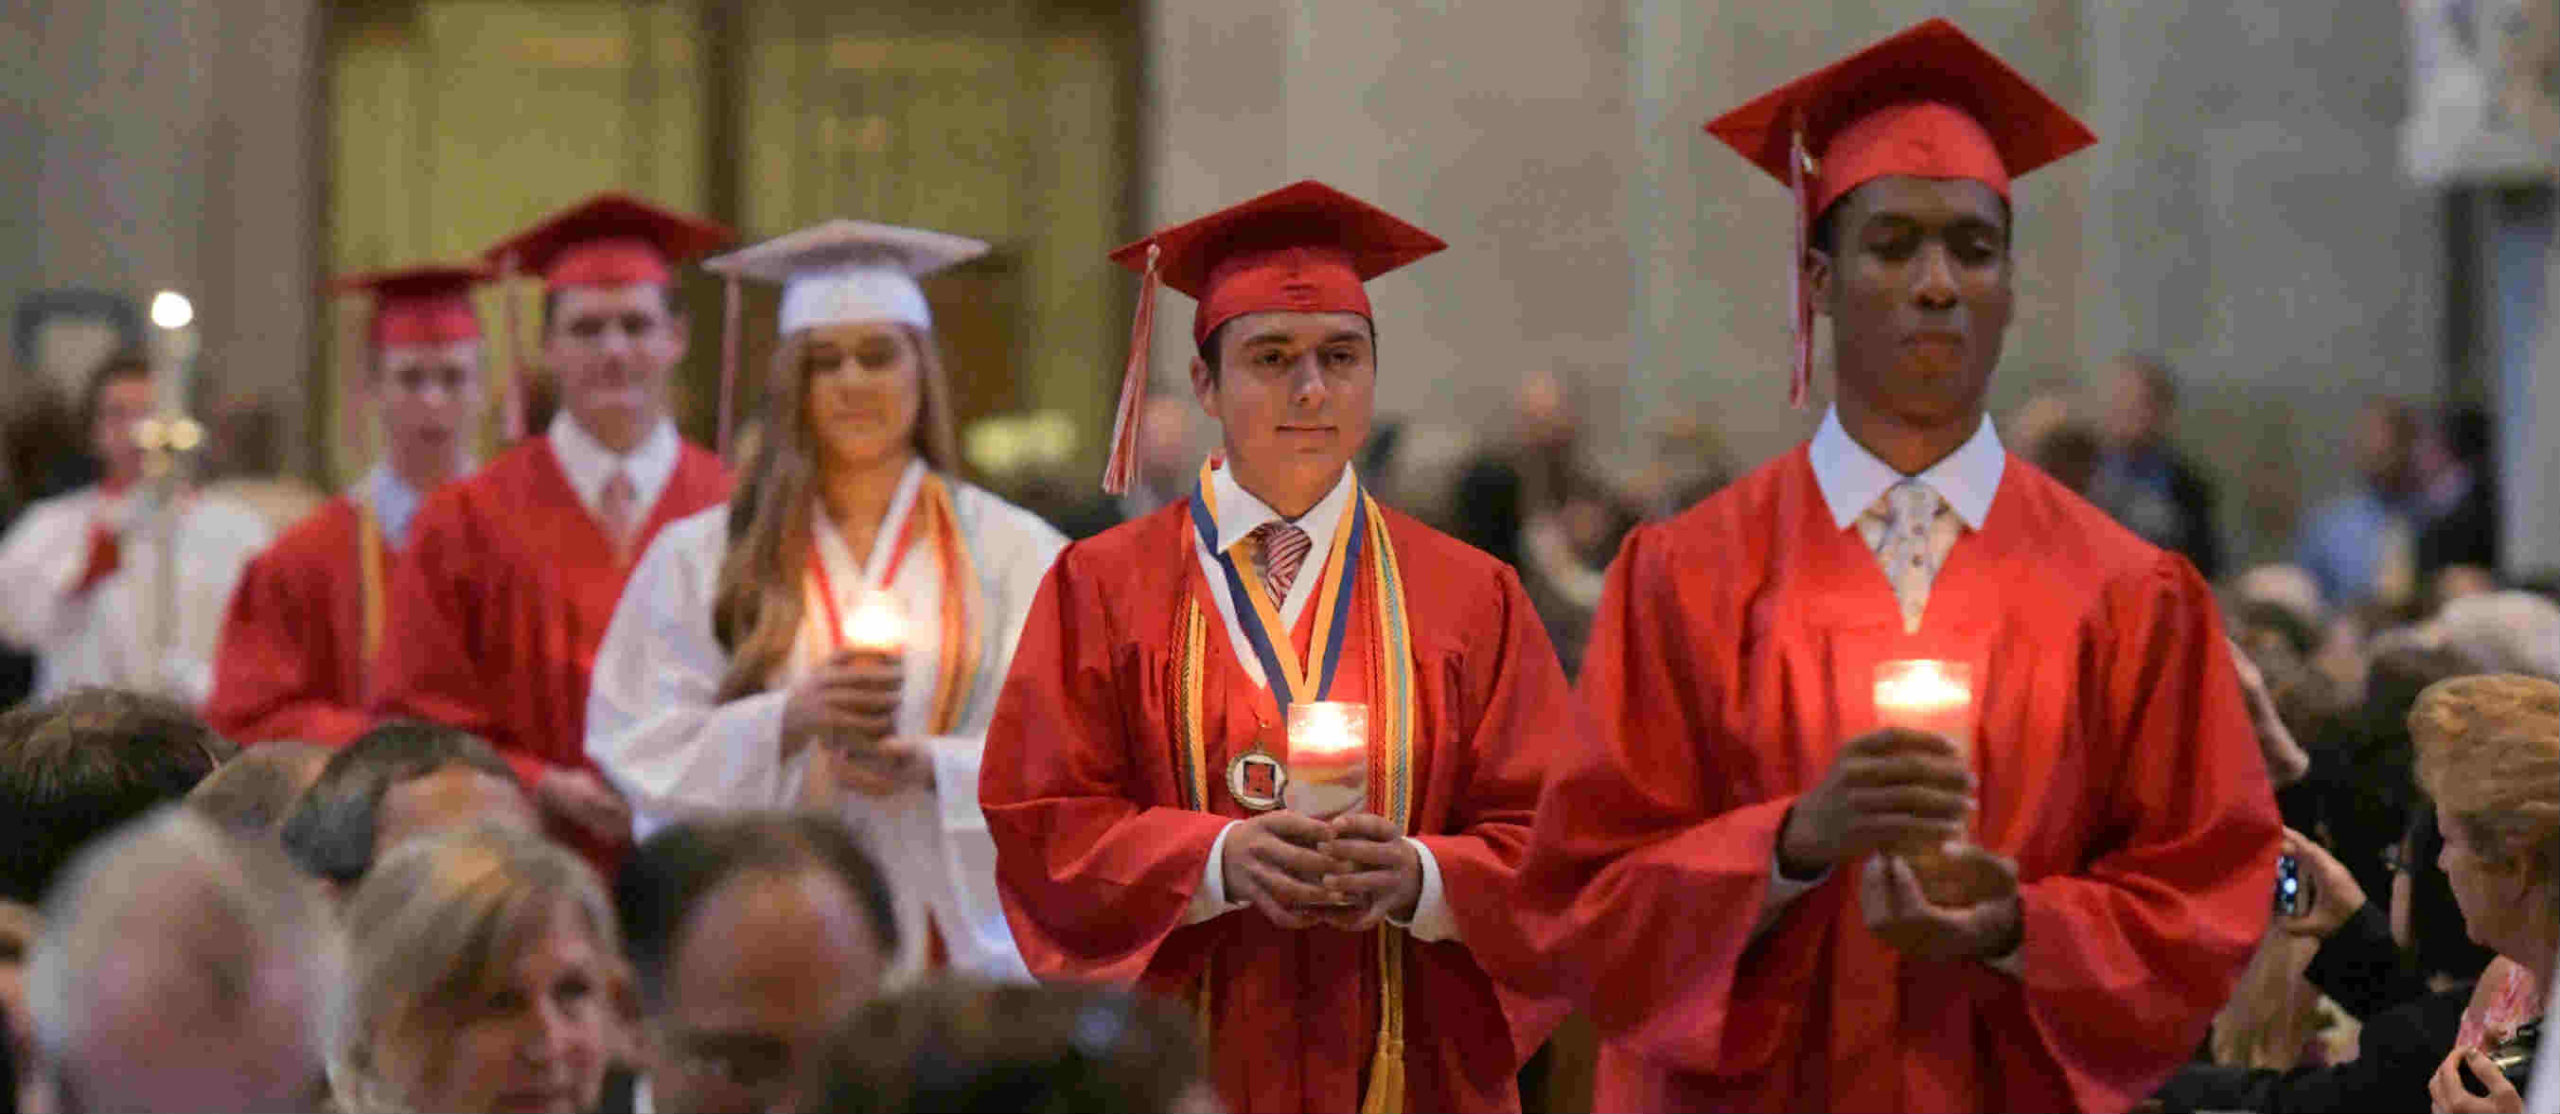 More than 2,200 graduate from 20 Catholic high schools in Archdiocese of Baltimore